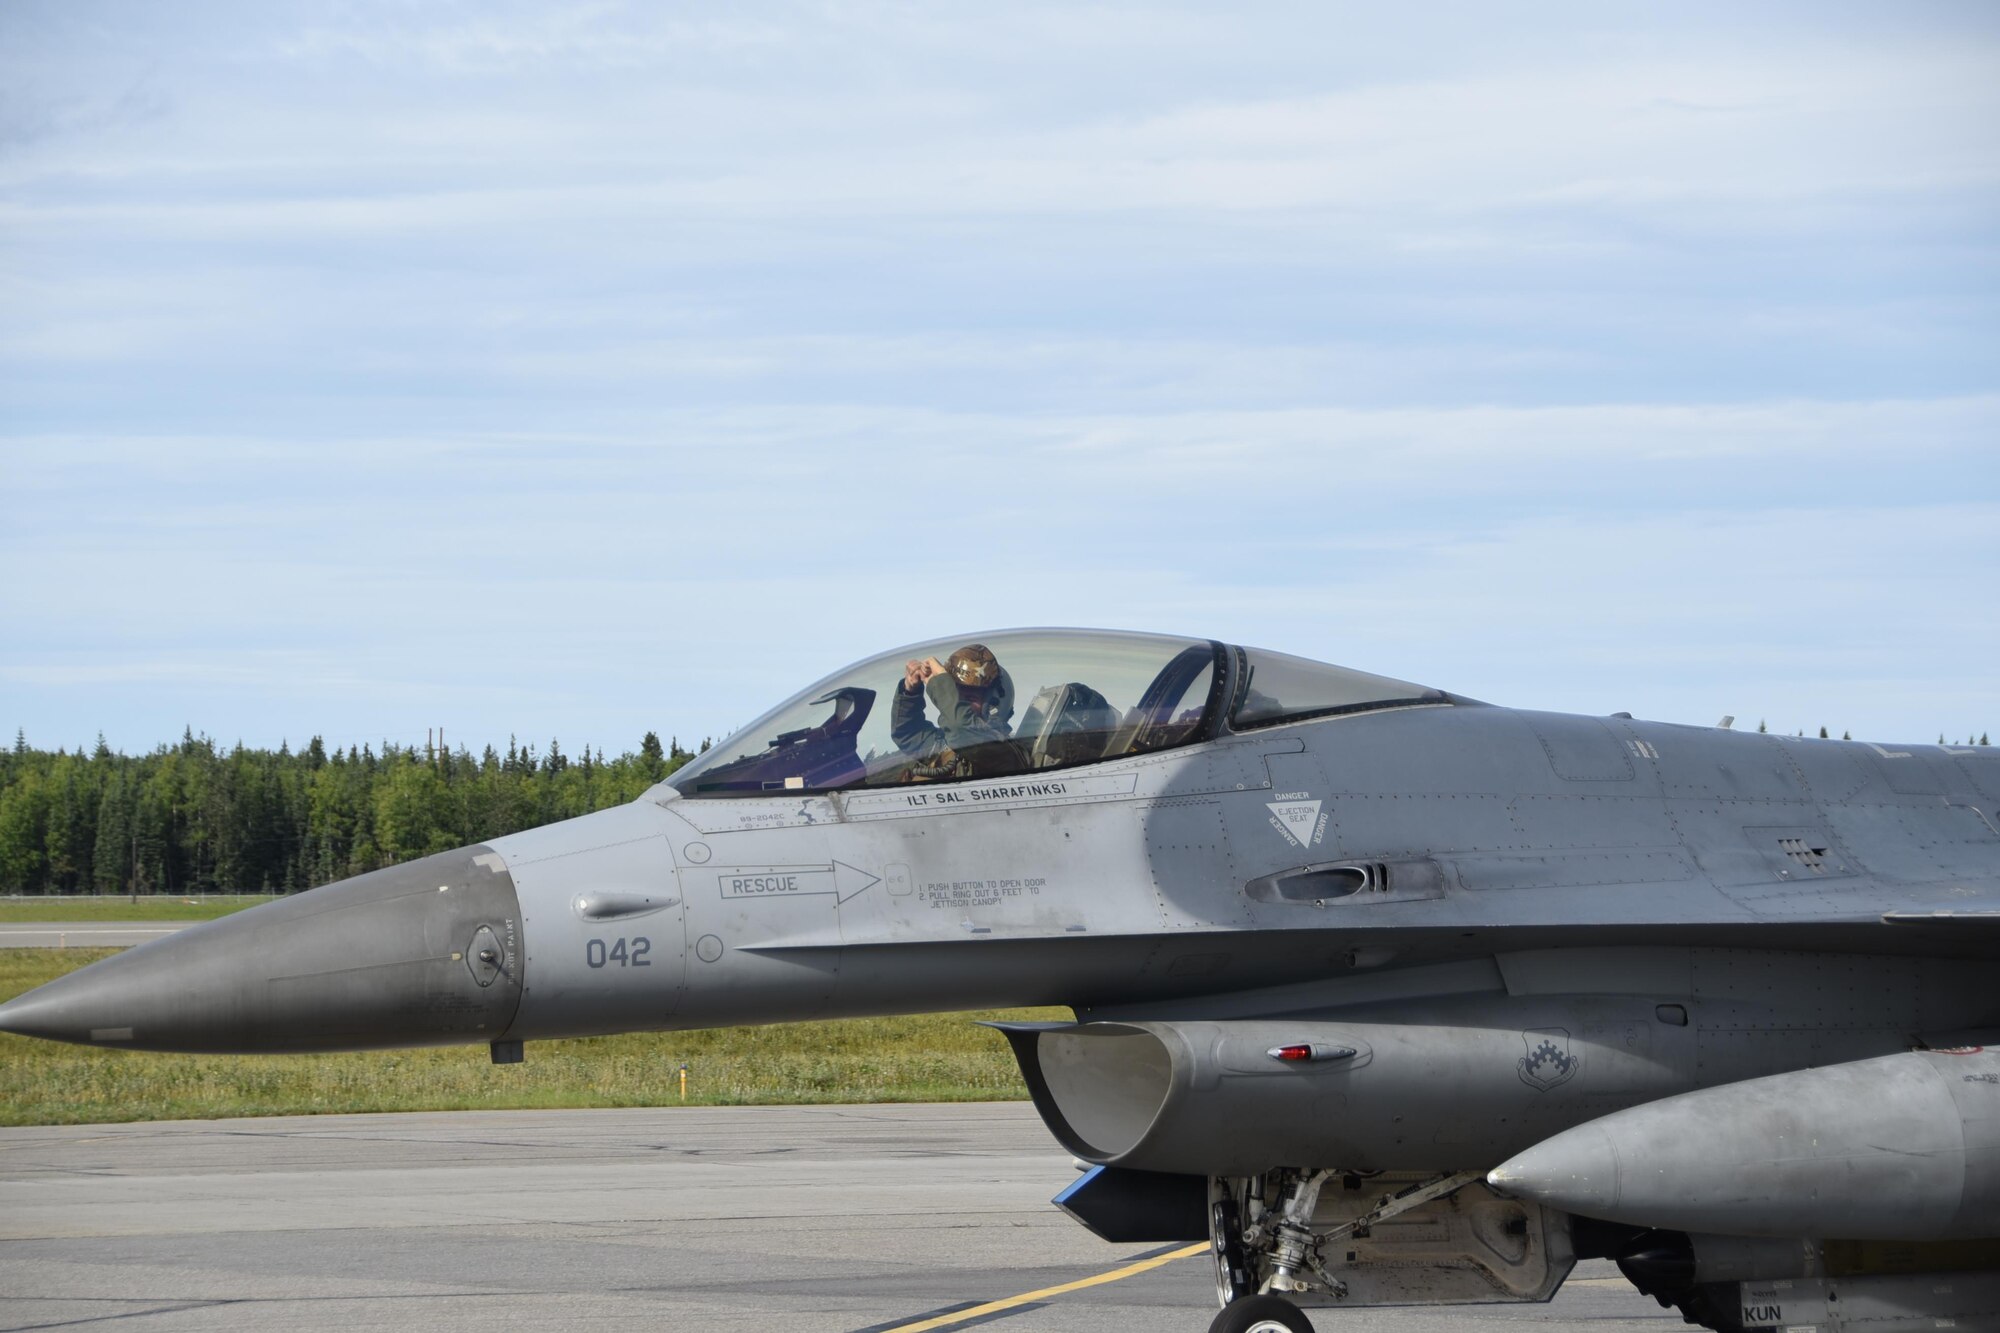 A U.S. Air Force F-16 Fighting Falcon pilot assigned to Kunsan Air Base, Republic of Korea, uses hand signals to communicate during Red Flag-Alaska at Eielson Air Force Base, Alaska, Aug. 2, 2017. RF-A provides an optimal training environment in the Indo-Asia Pacific region and focuses on improving ground, space and cyberspace combat readiness and interoperability of U.S. and international forces. (U.S. Air Force photo by Staff Sgt. Joshua Rosales)